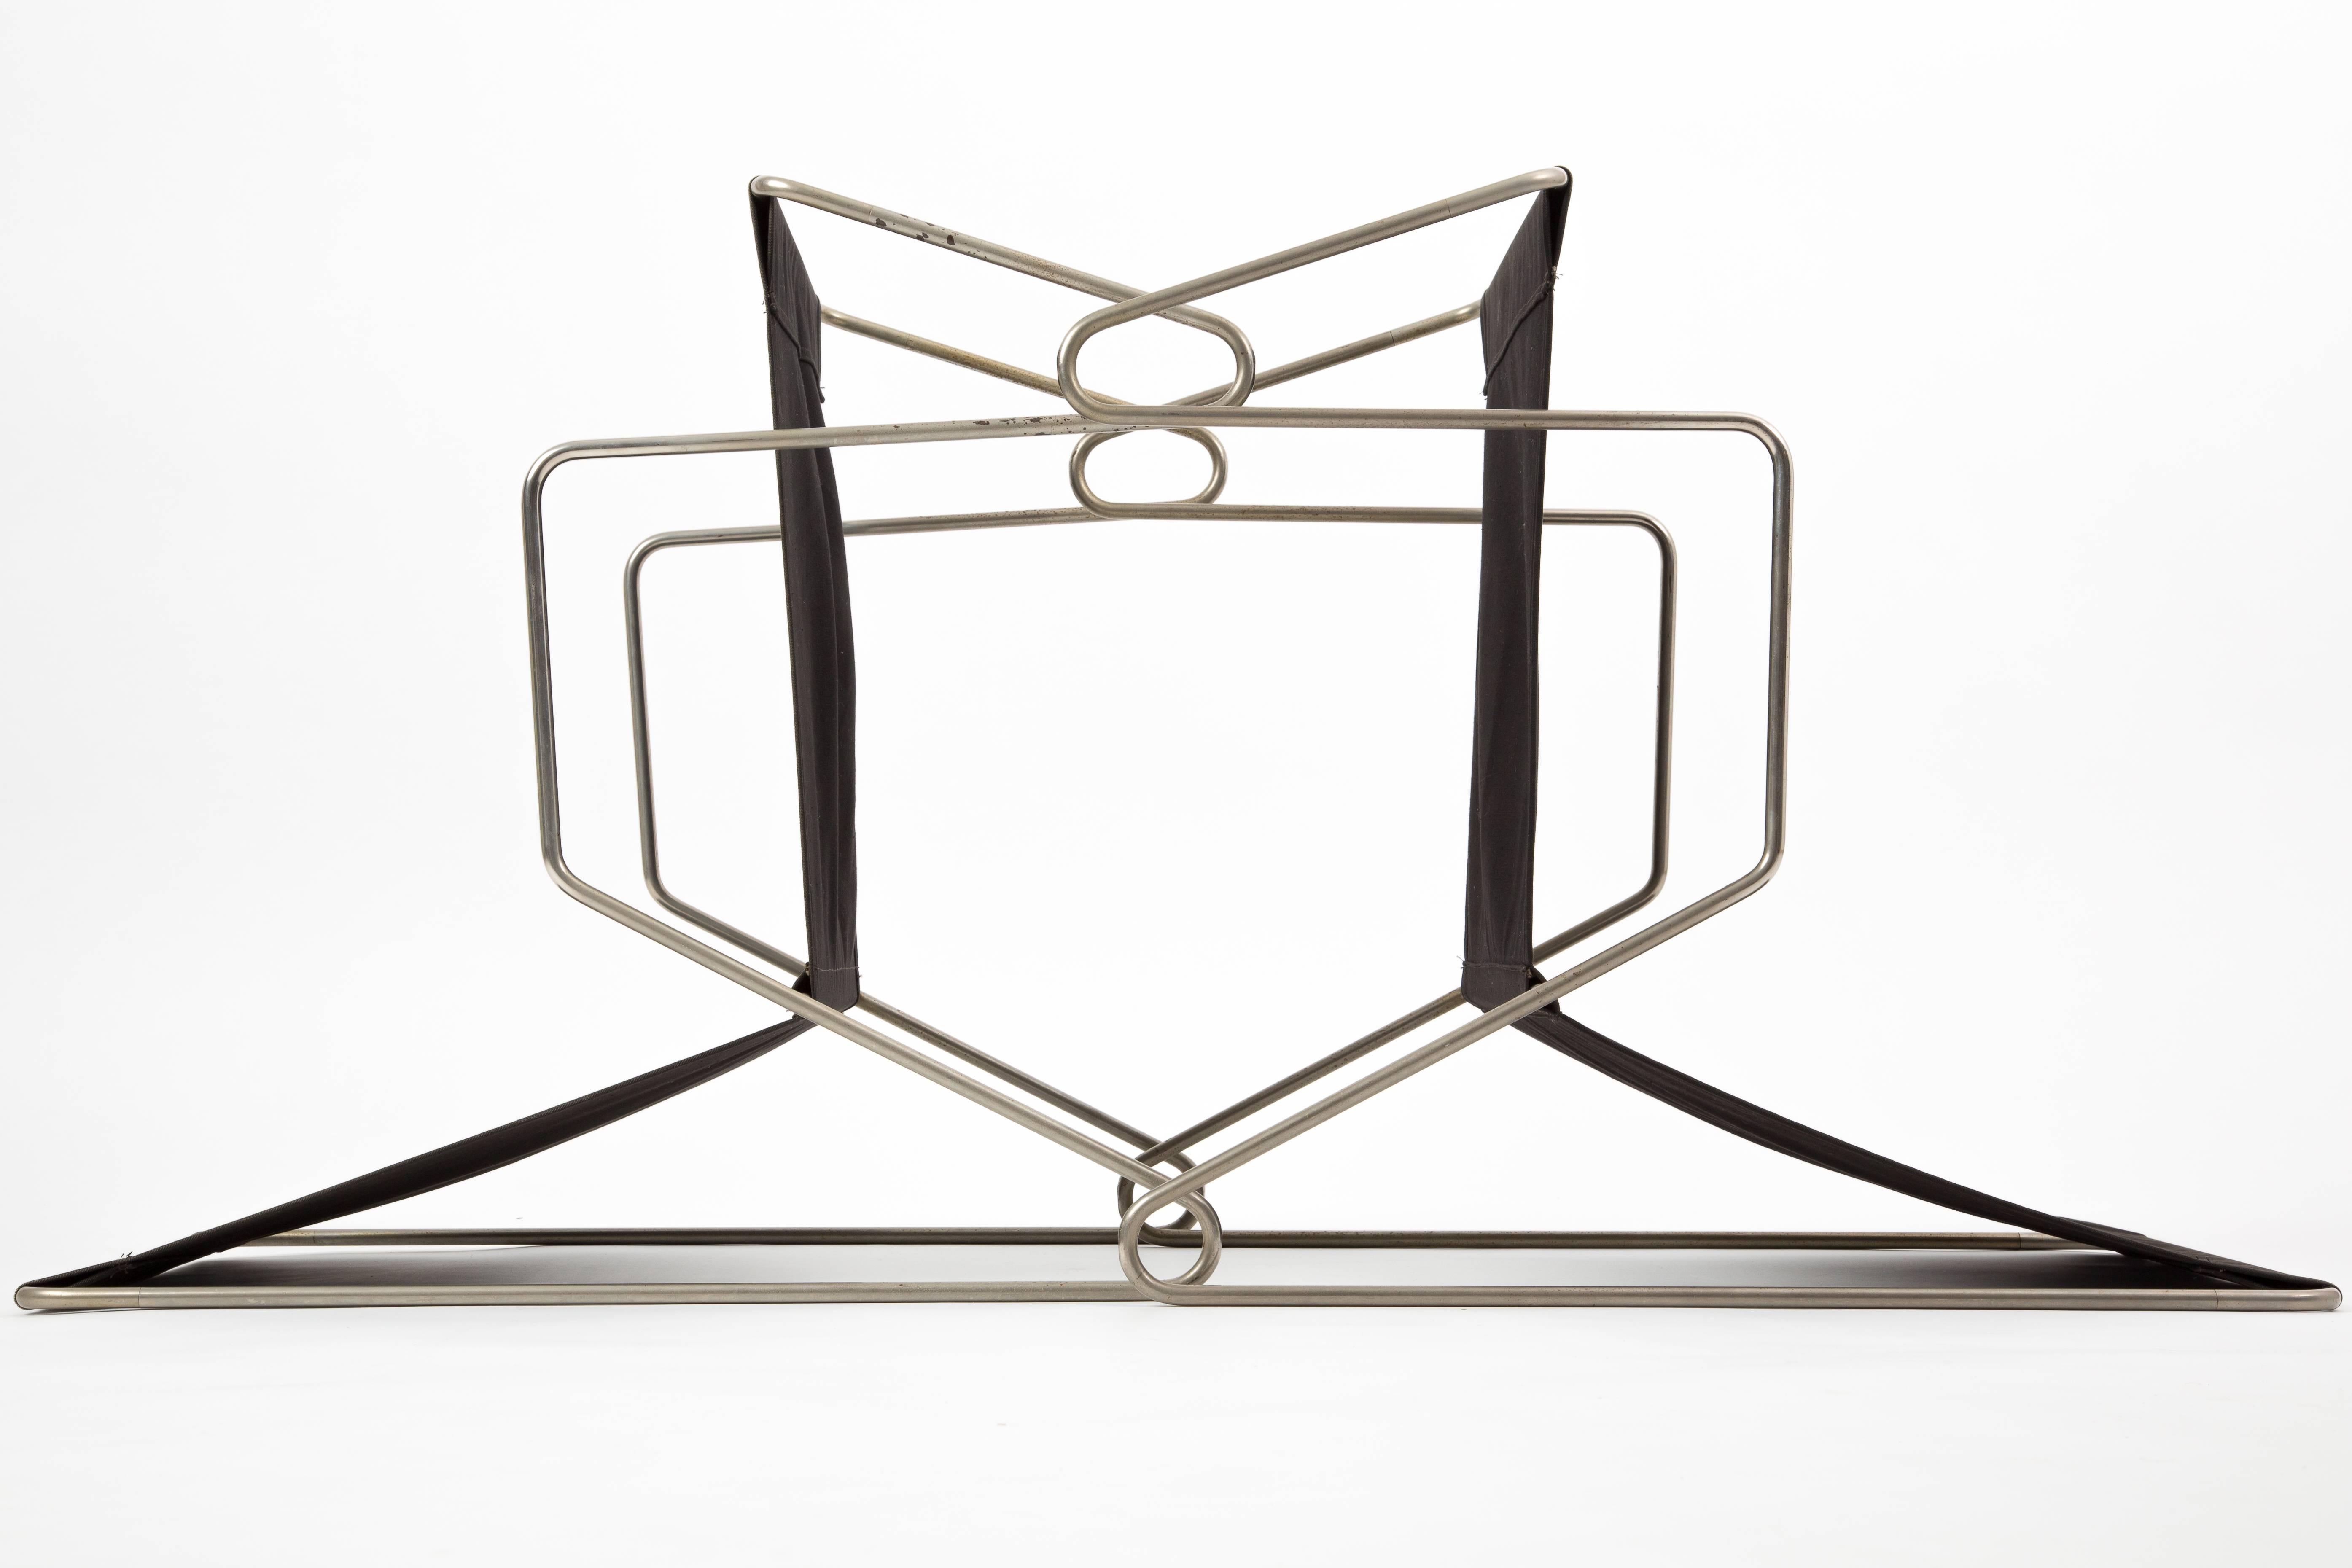 A pair of Bachelor chairs designed by Verner Panton for Fritz Hansen, at least 50 years old. The canvas is anthracite colored. The very thin frames are the topic of this design. The chairs are nearly a graphic thing.